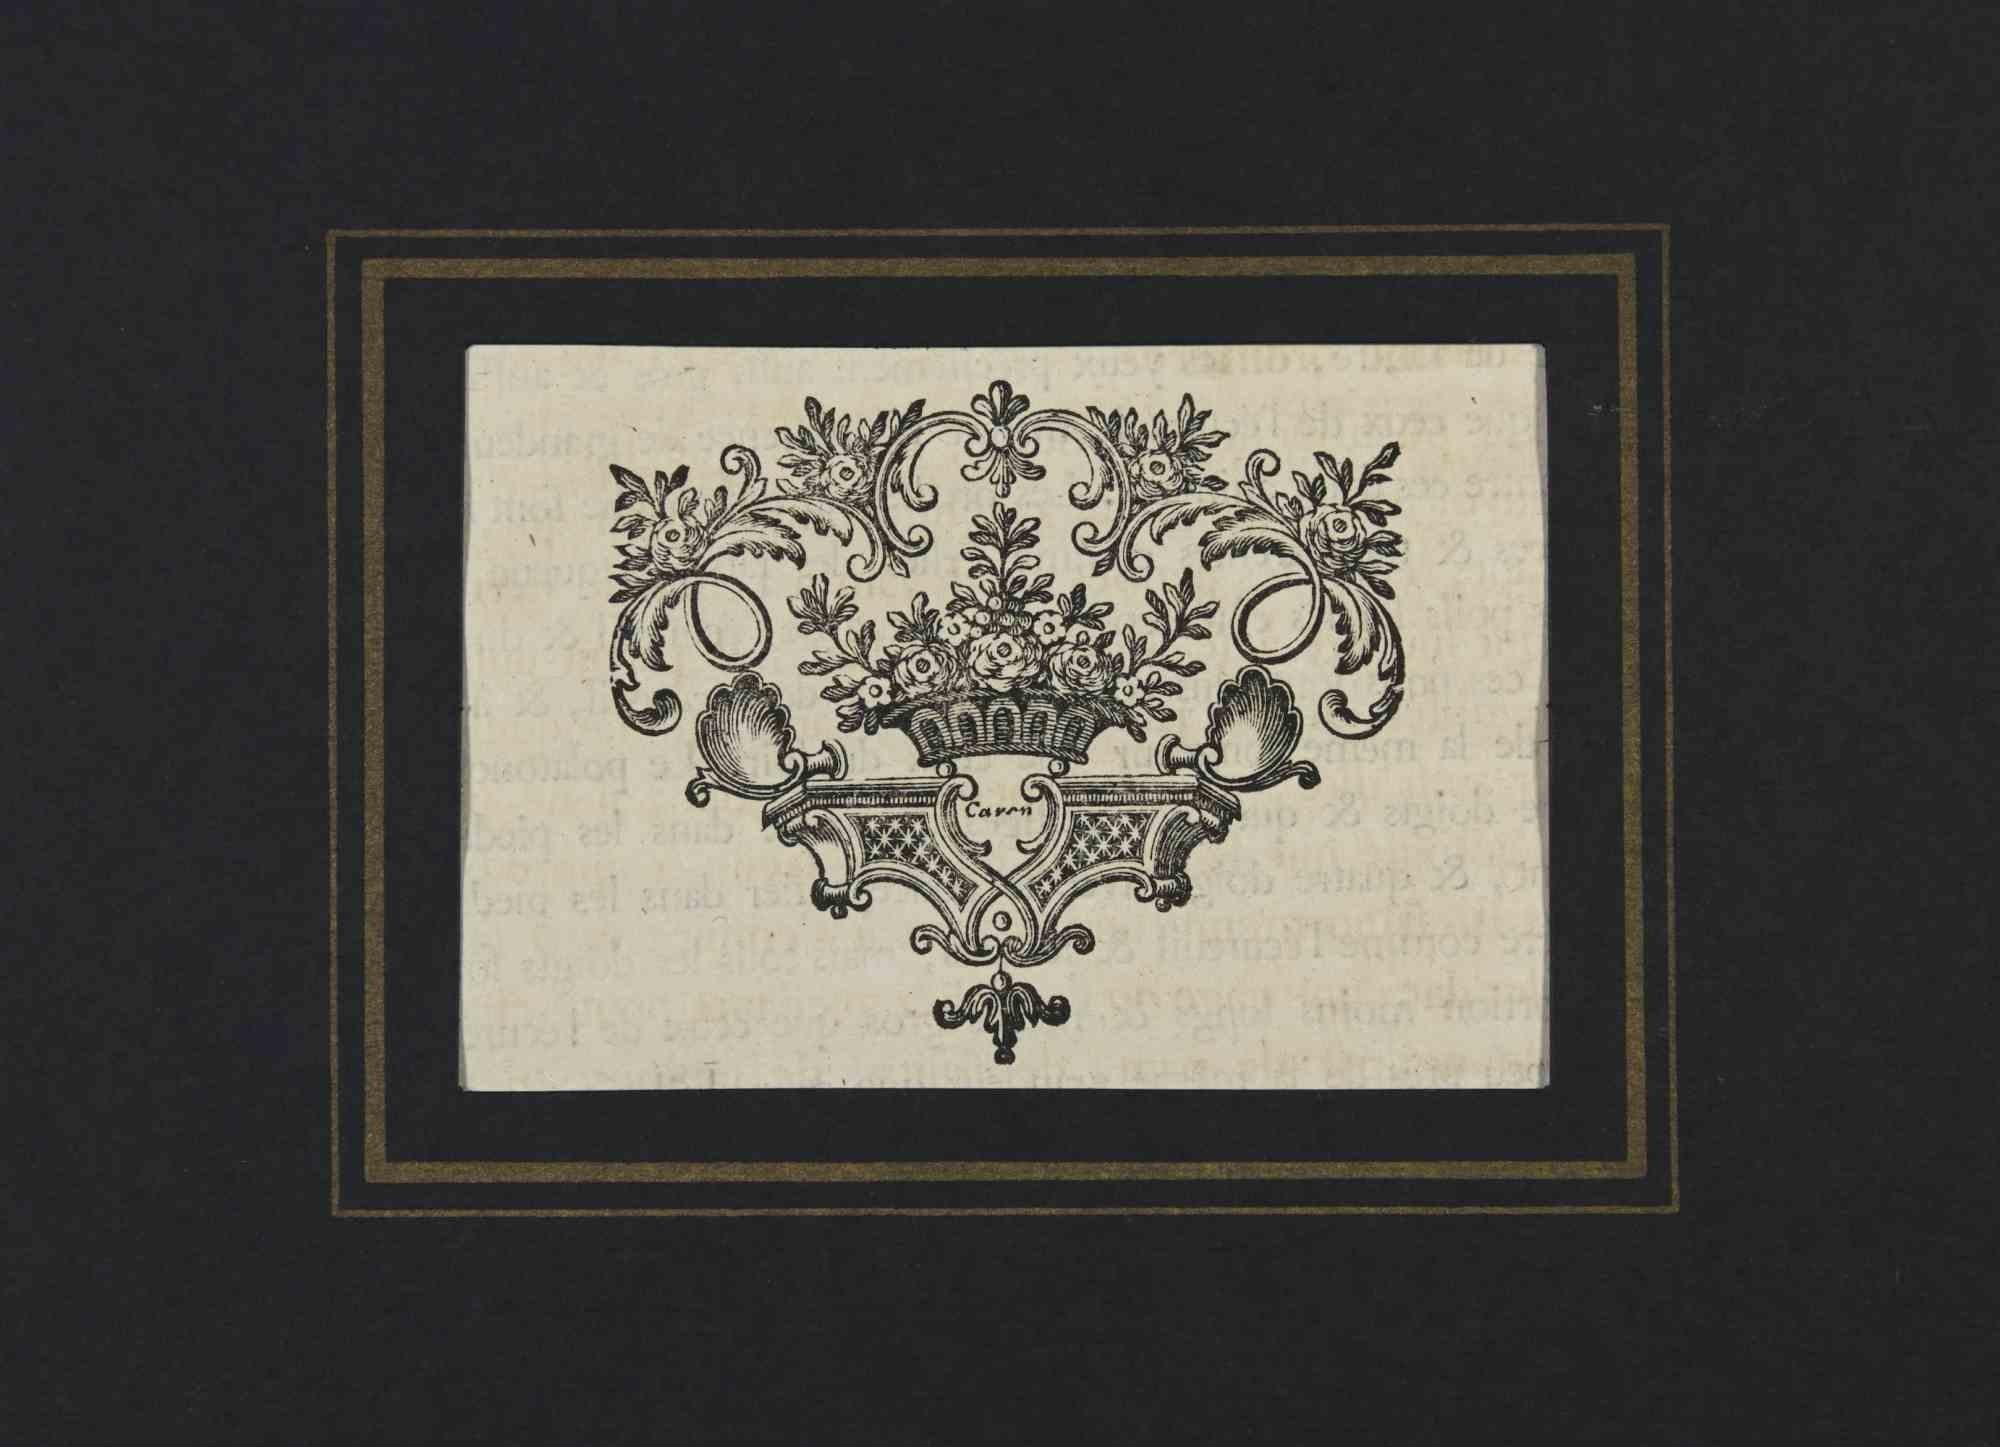 The Ornament is a woodcut print realized by Charles-Antoine Jombert in 1755.

Good conditions.

The print was realized for the anatomy study “JOMBERT, Charles-Antoine (1712-1784) - Méthode pour apprendre le dessein, ou l'on donne les regles